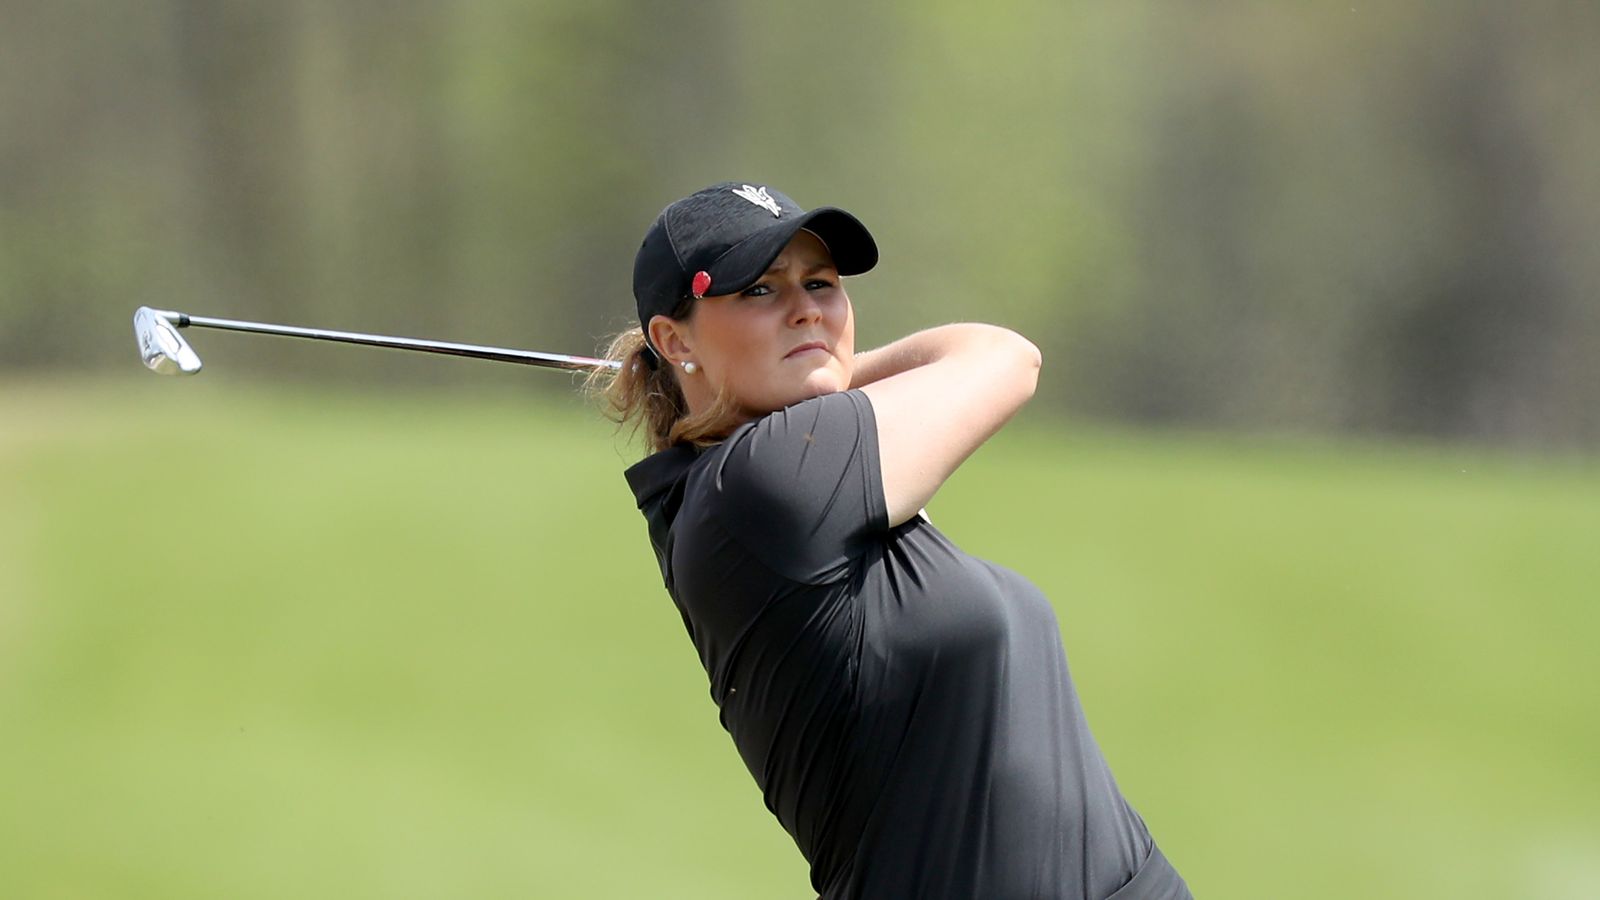 Olivia Mehaffey and Alice Hewson into final round of Augusta National ...